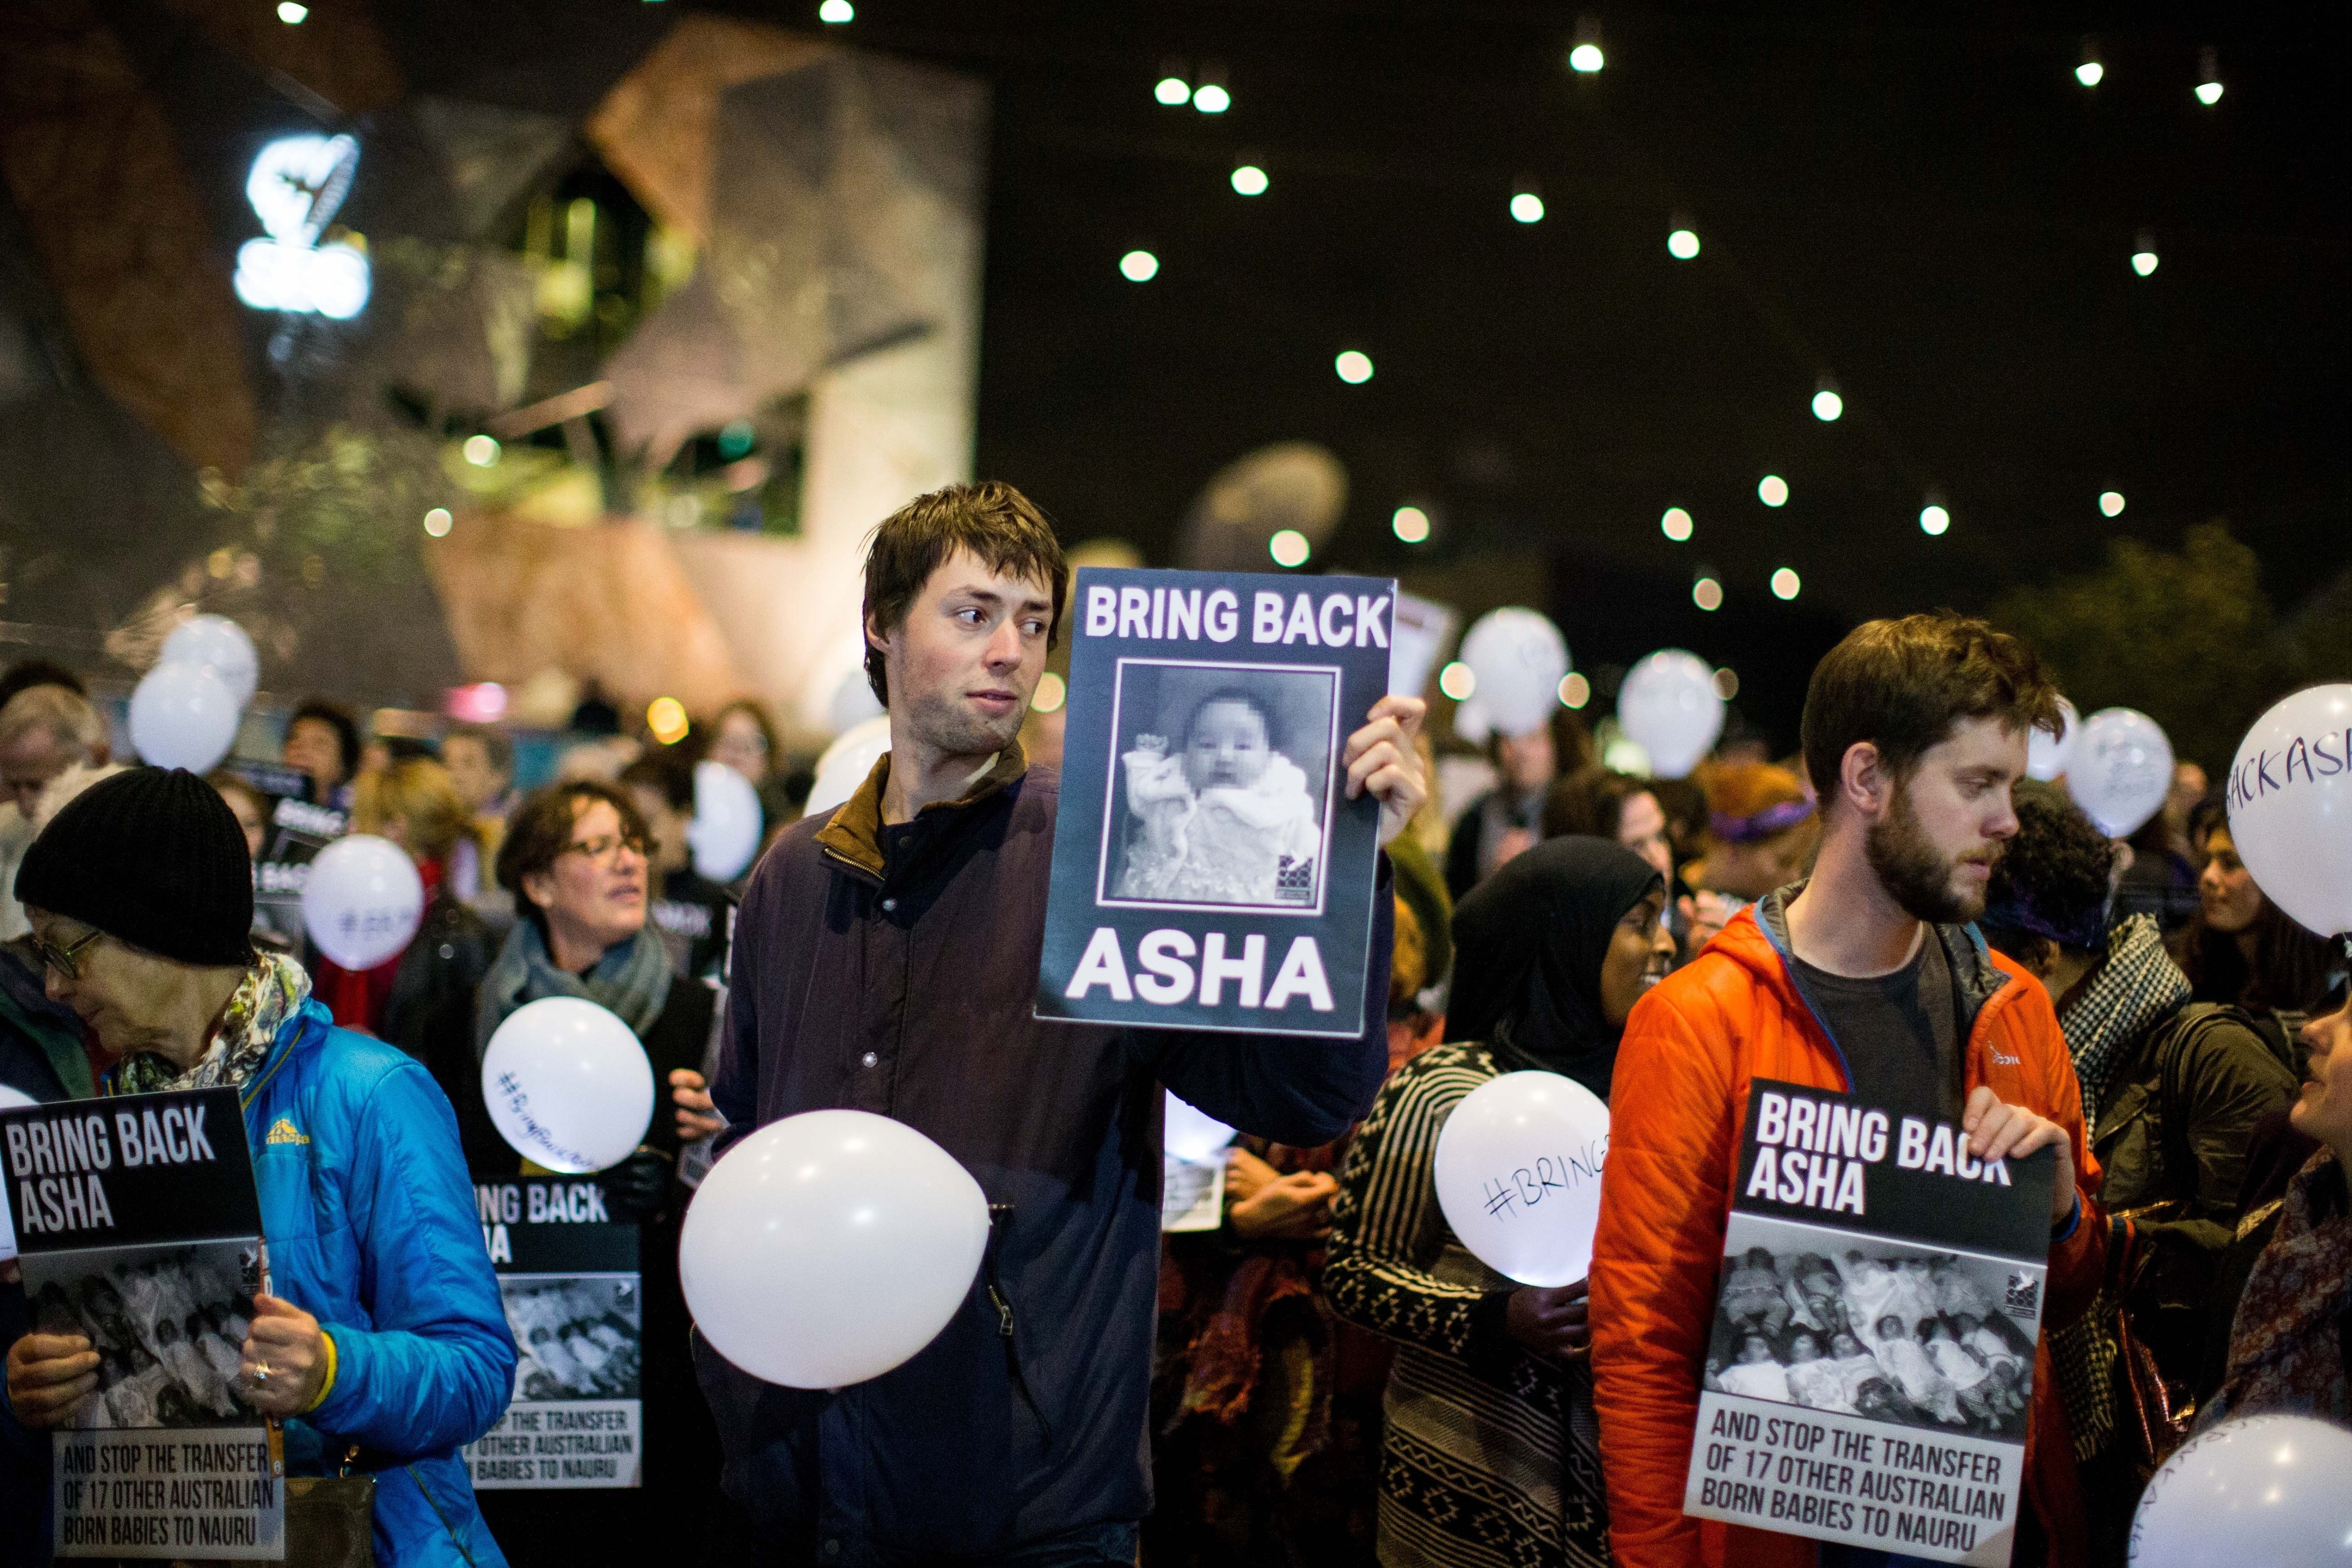 Protestors at a rally at Melbourne's Federation Square to protest the deportation of 5 month old refugee 'Asha' to Nauru, in Melbourne, Australia on June 25, 2015. (Asanka Brendon Ratnayake—Anadolu Agency/Getty Images)